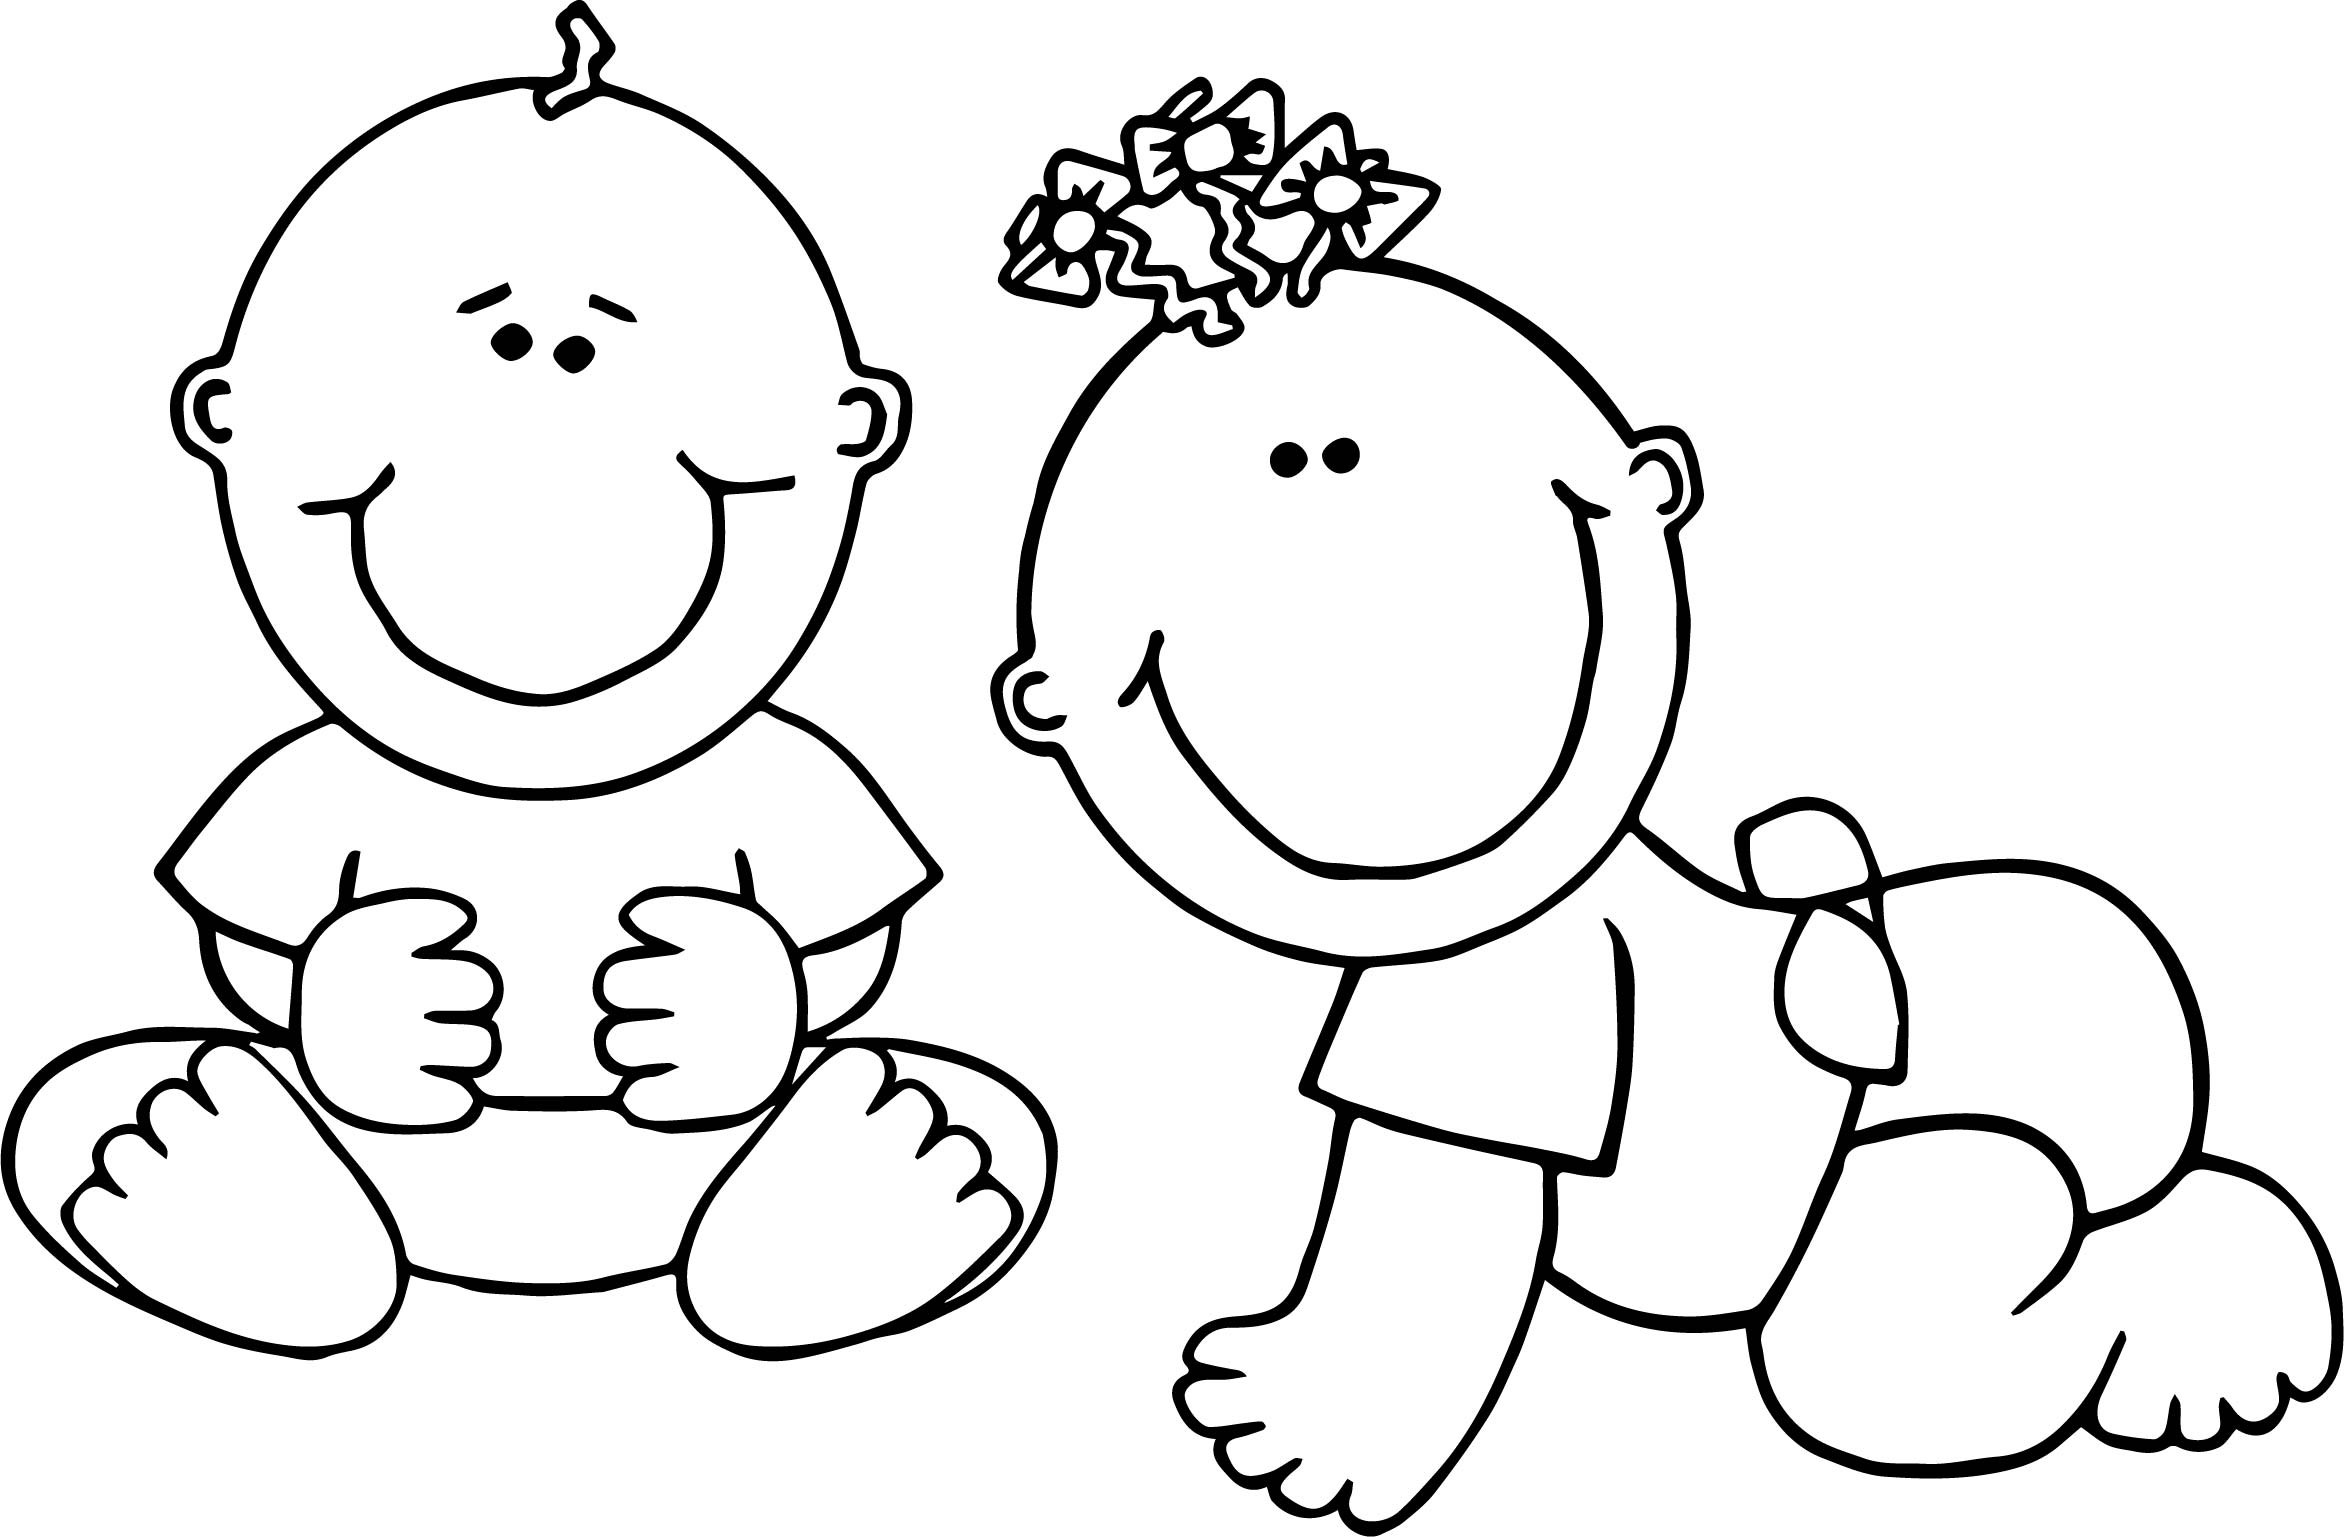 Baby Boy Coloring Pages
 Two Baby Boy Coloring Page